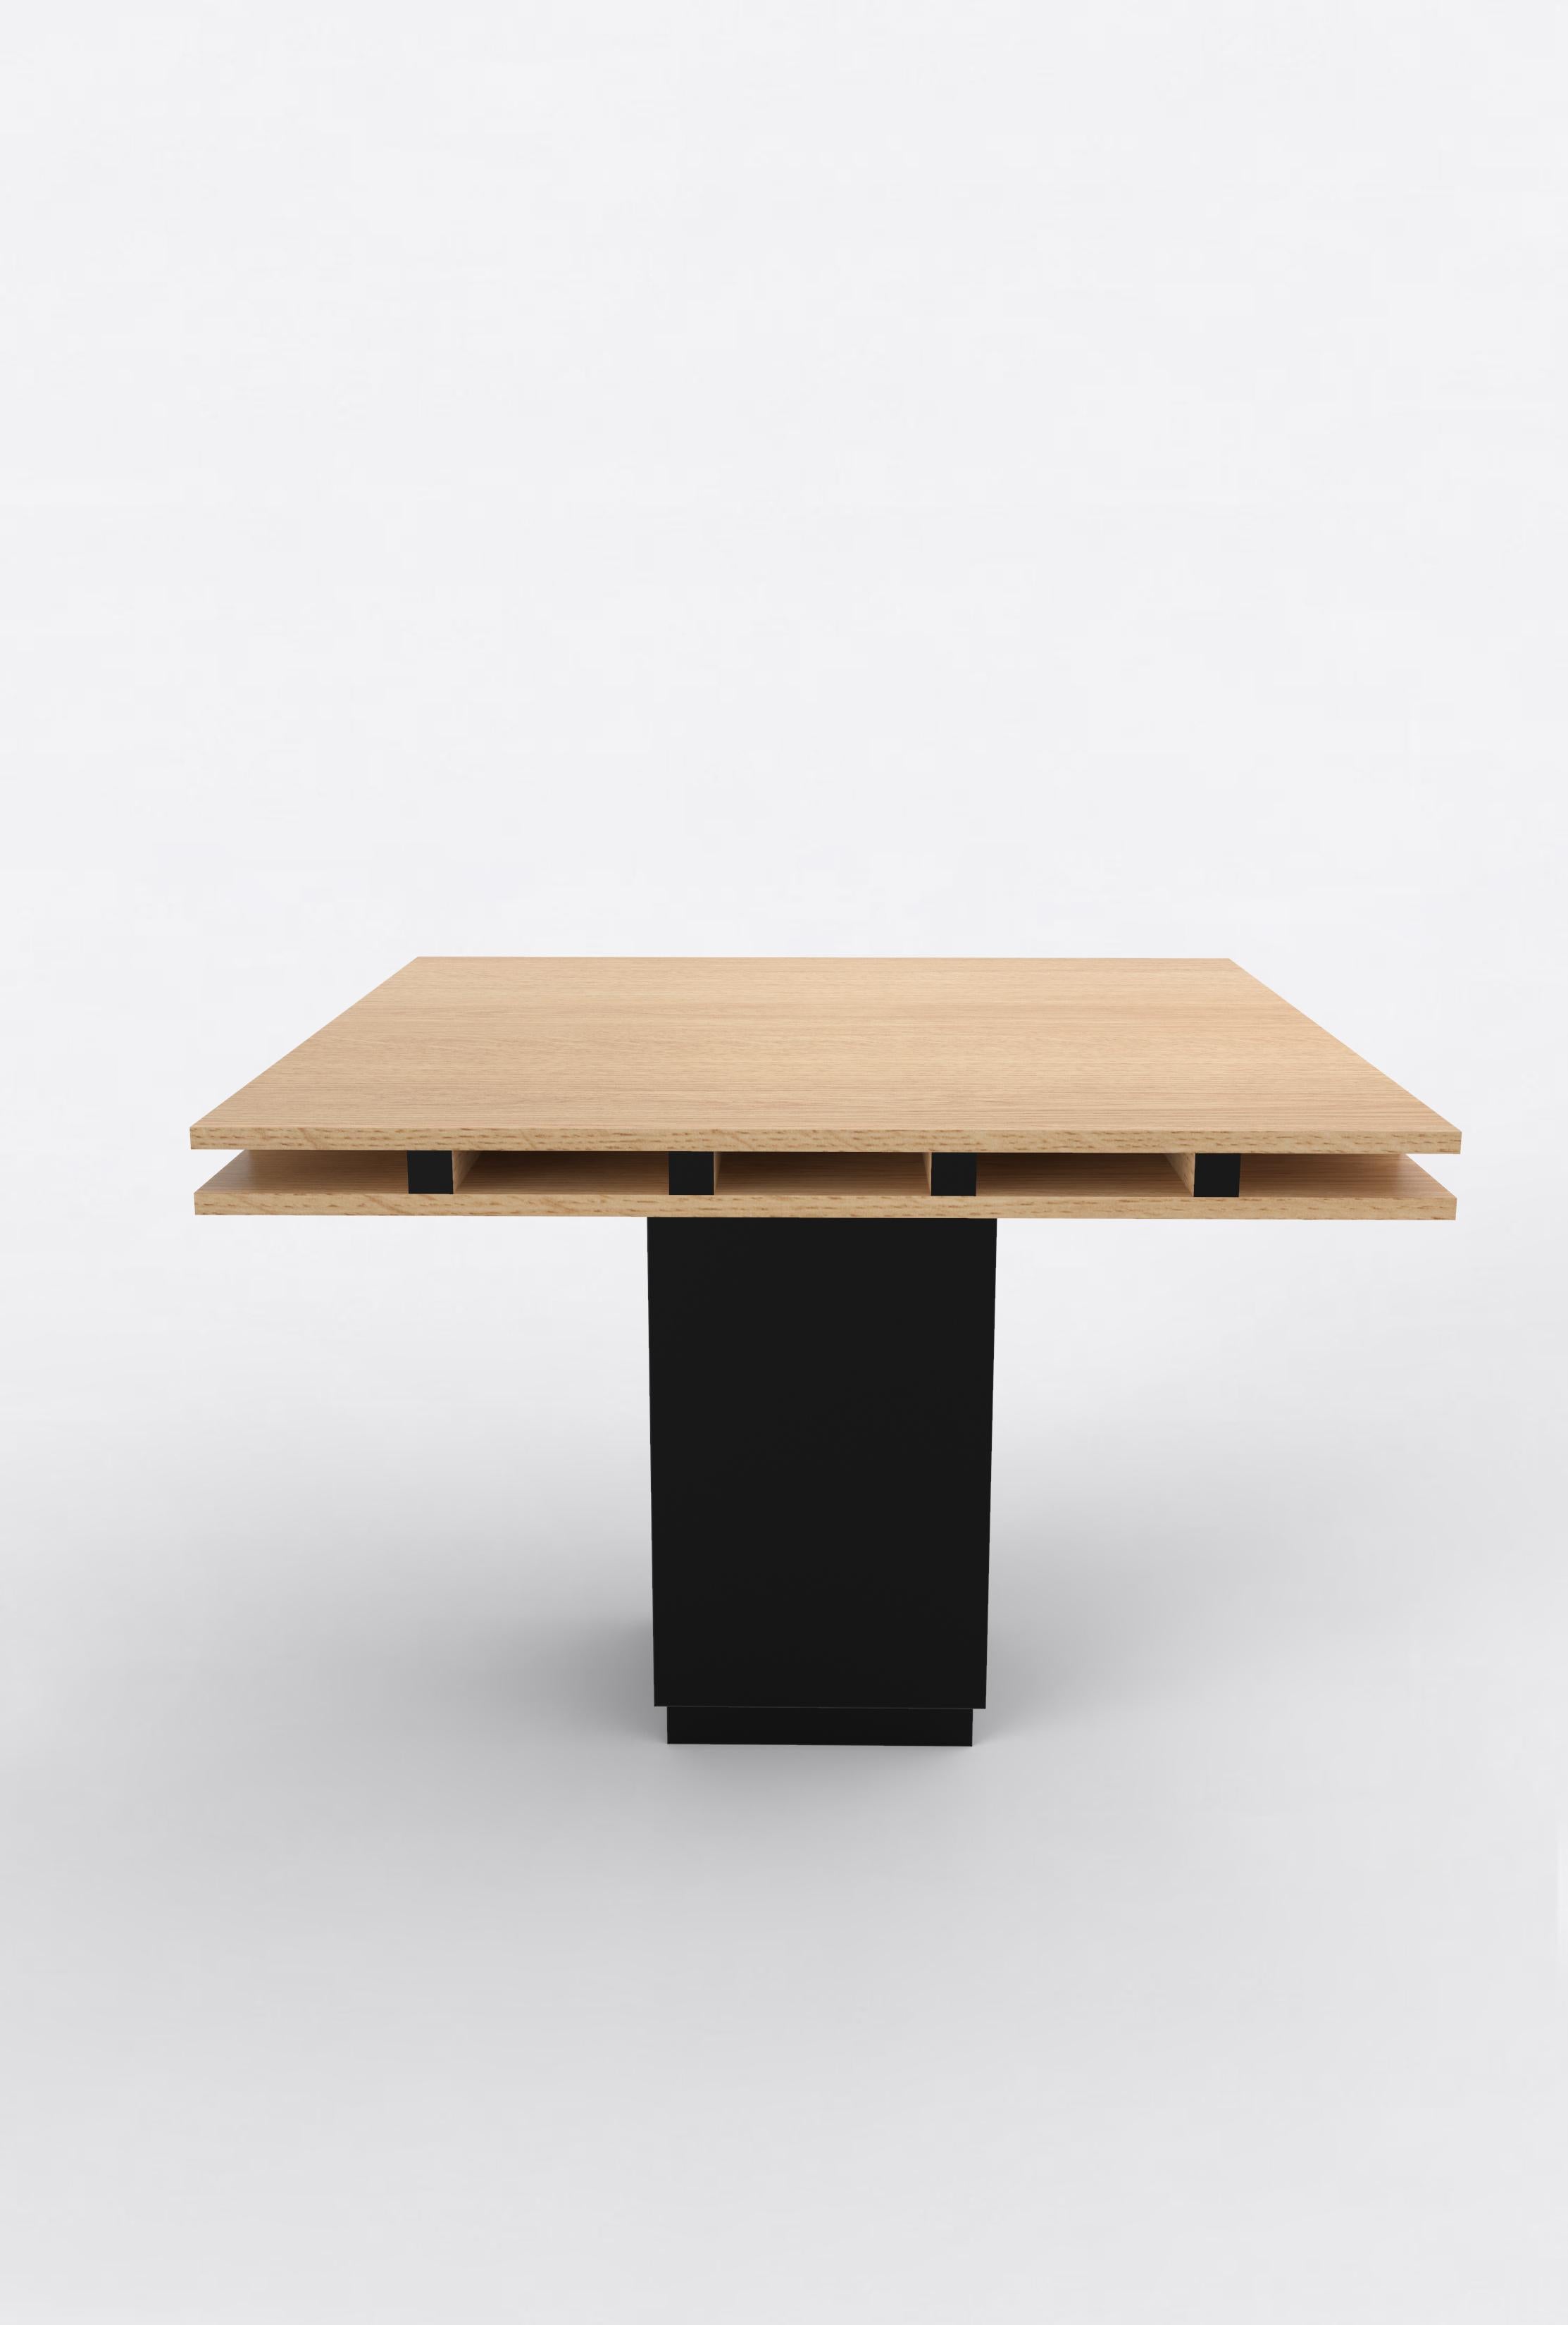 Orphan work 101 Dining Table
Shown in oak and black
Available in natural oak with painted base and edges
Measures: 60” L x 60” W x 30” H
Dimensions available:
42” L x 42” W x 30” H
60” L x 60” W x 30” H
72” L x 72” W x 30” H

Orphan work is designed